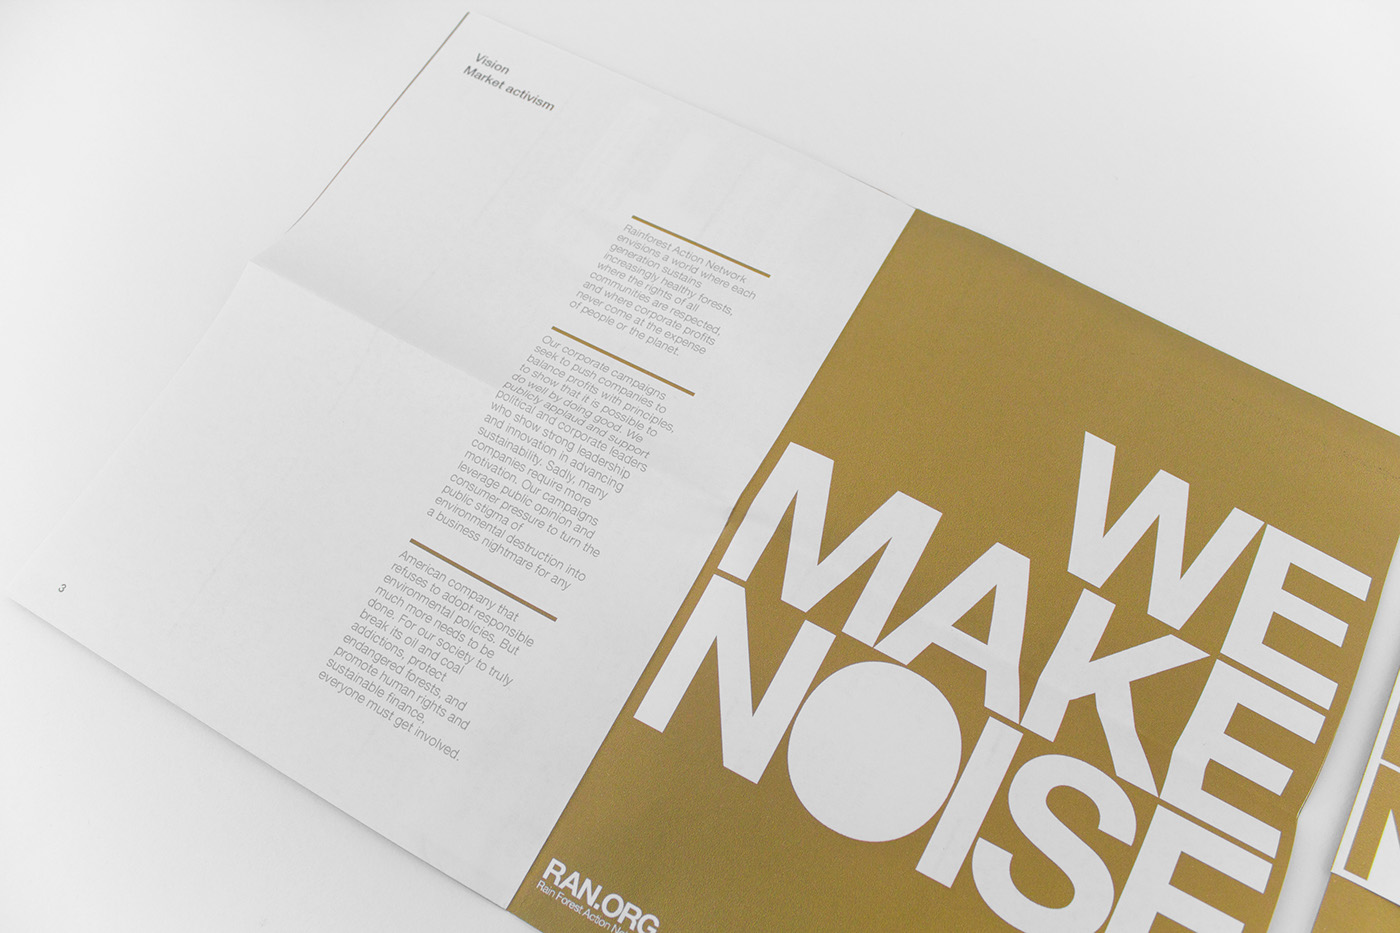 Booklet design art Nature eco studio8 noise graphics colour editorial book green logo fold Layout